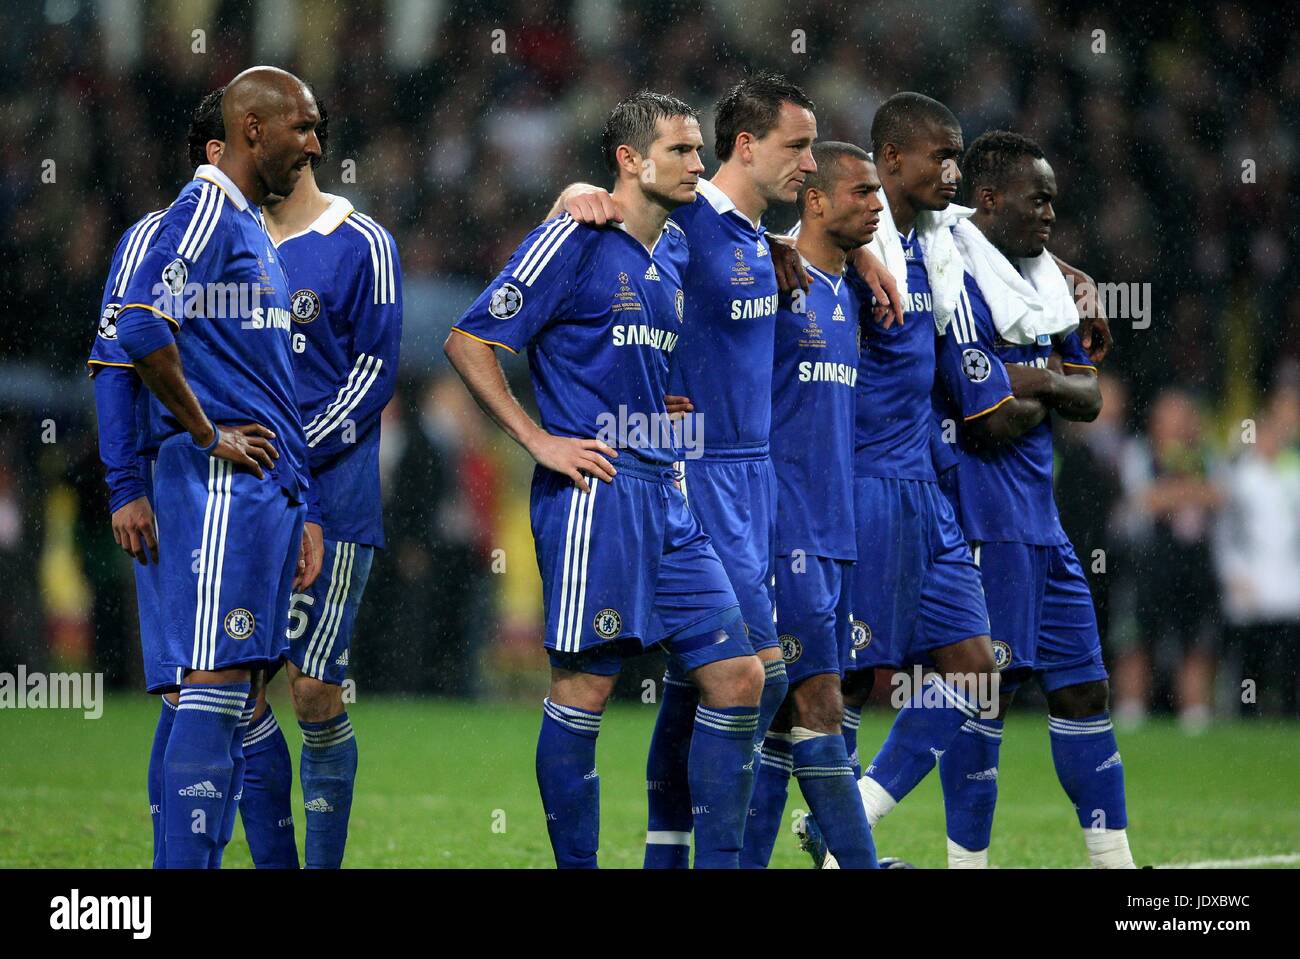 CHELSEA PLAYERS WATCH MANCHESTER UNITED V CHELSEA LUZHNIKI STADIUM MOSCOW  RUSSIAN FEDERATION 21 May 2008 Stock Photo - Alamy